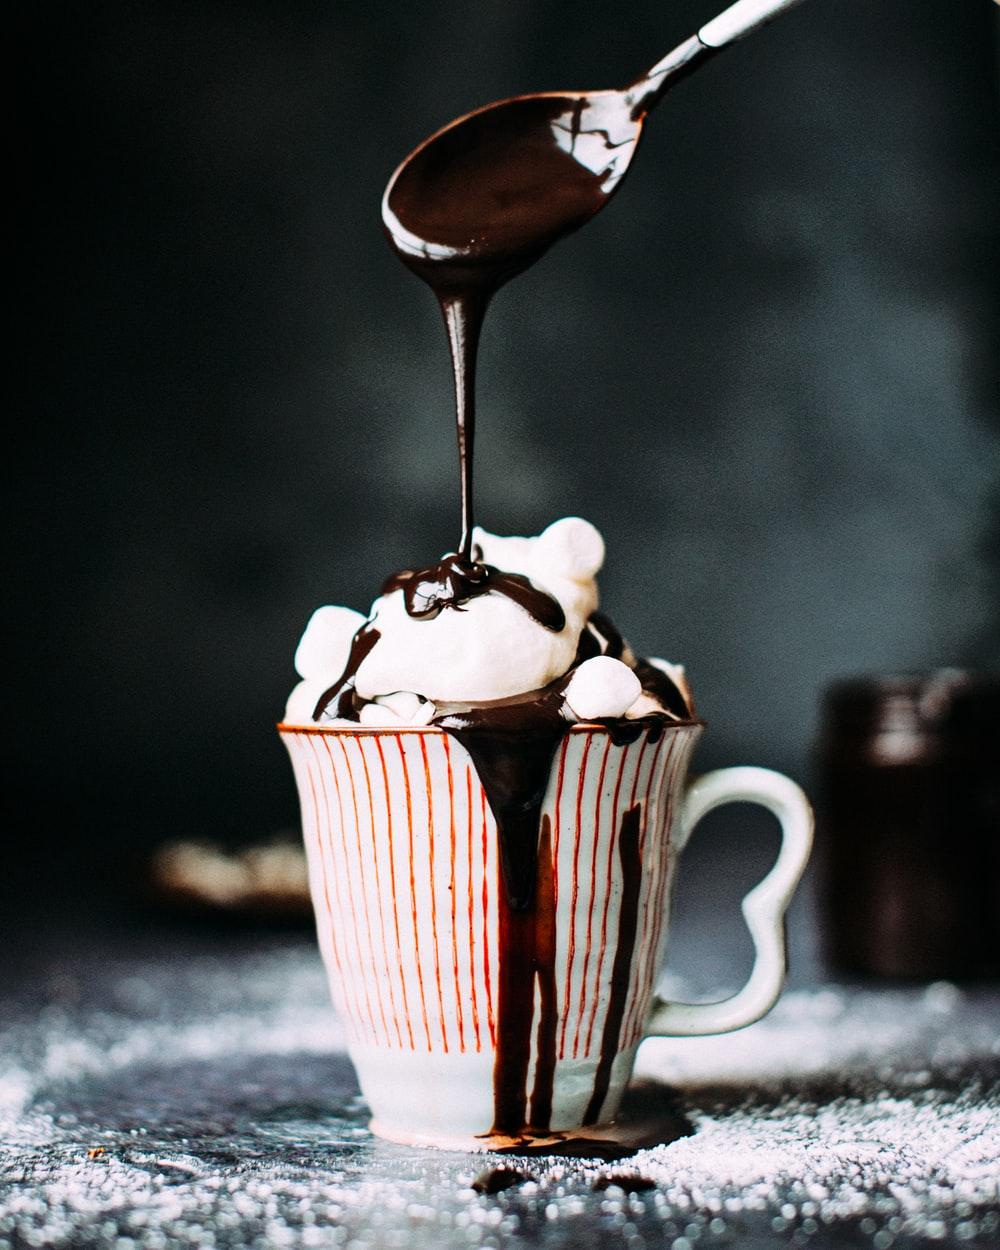 Hot Cocoa Picture. Download Free Image